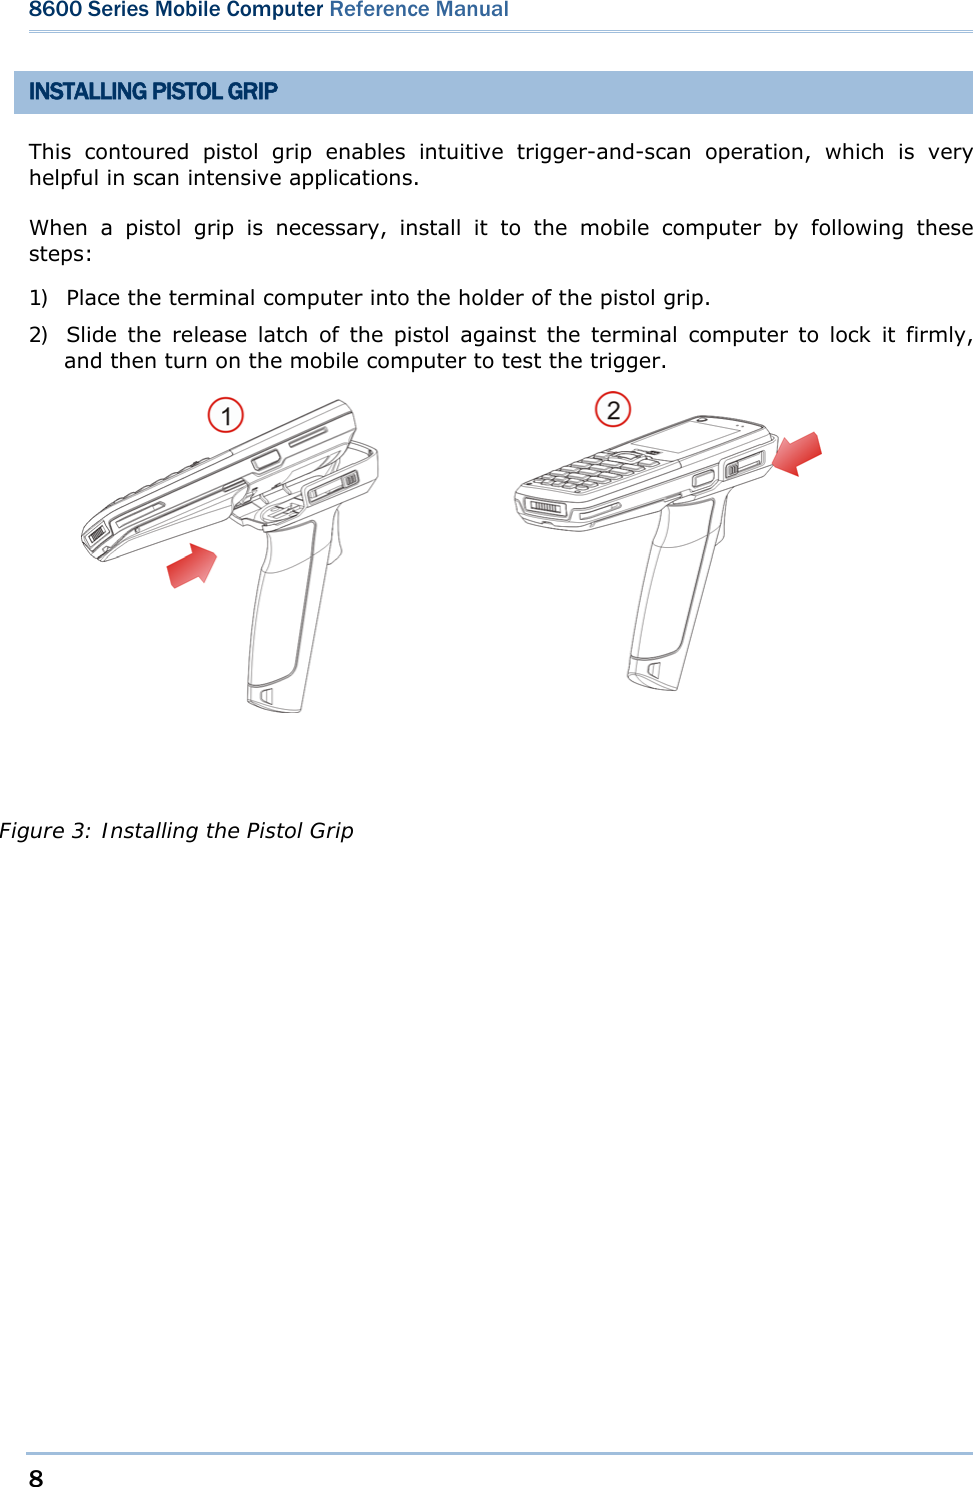 8  8600 Series Mobile Computer Reference Manual  INSTALLING PISTOL GRIP This contoured pistol grip enables intuitive trigger-and-scan operation, which is very helpful in scan intensive applications. When a pistol grip is necessary, install it to the mobile computer by following these steps: 1) Place the terminal computer into the holder of the pistol grip. 2) Slide the release latch of the pistol against the terminal computer to lock it firmly, and then turn on the mobile computer to test the trigger.           Figure 3: Installing the Pistol Grip 